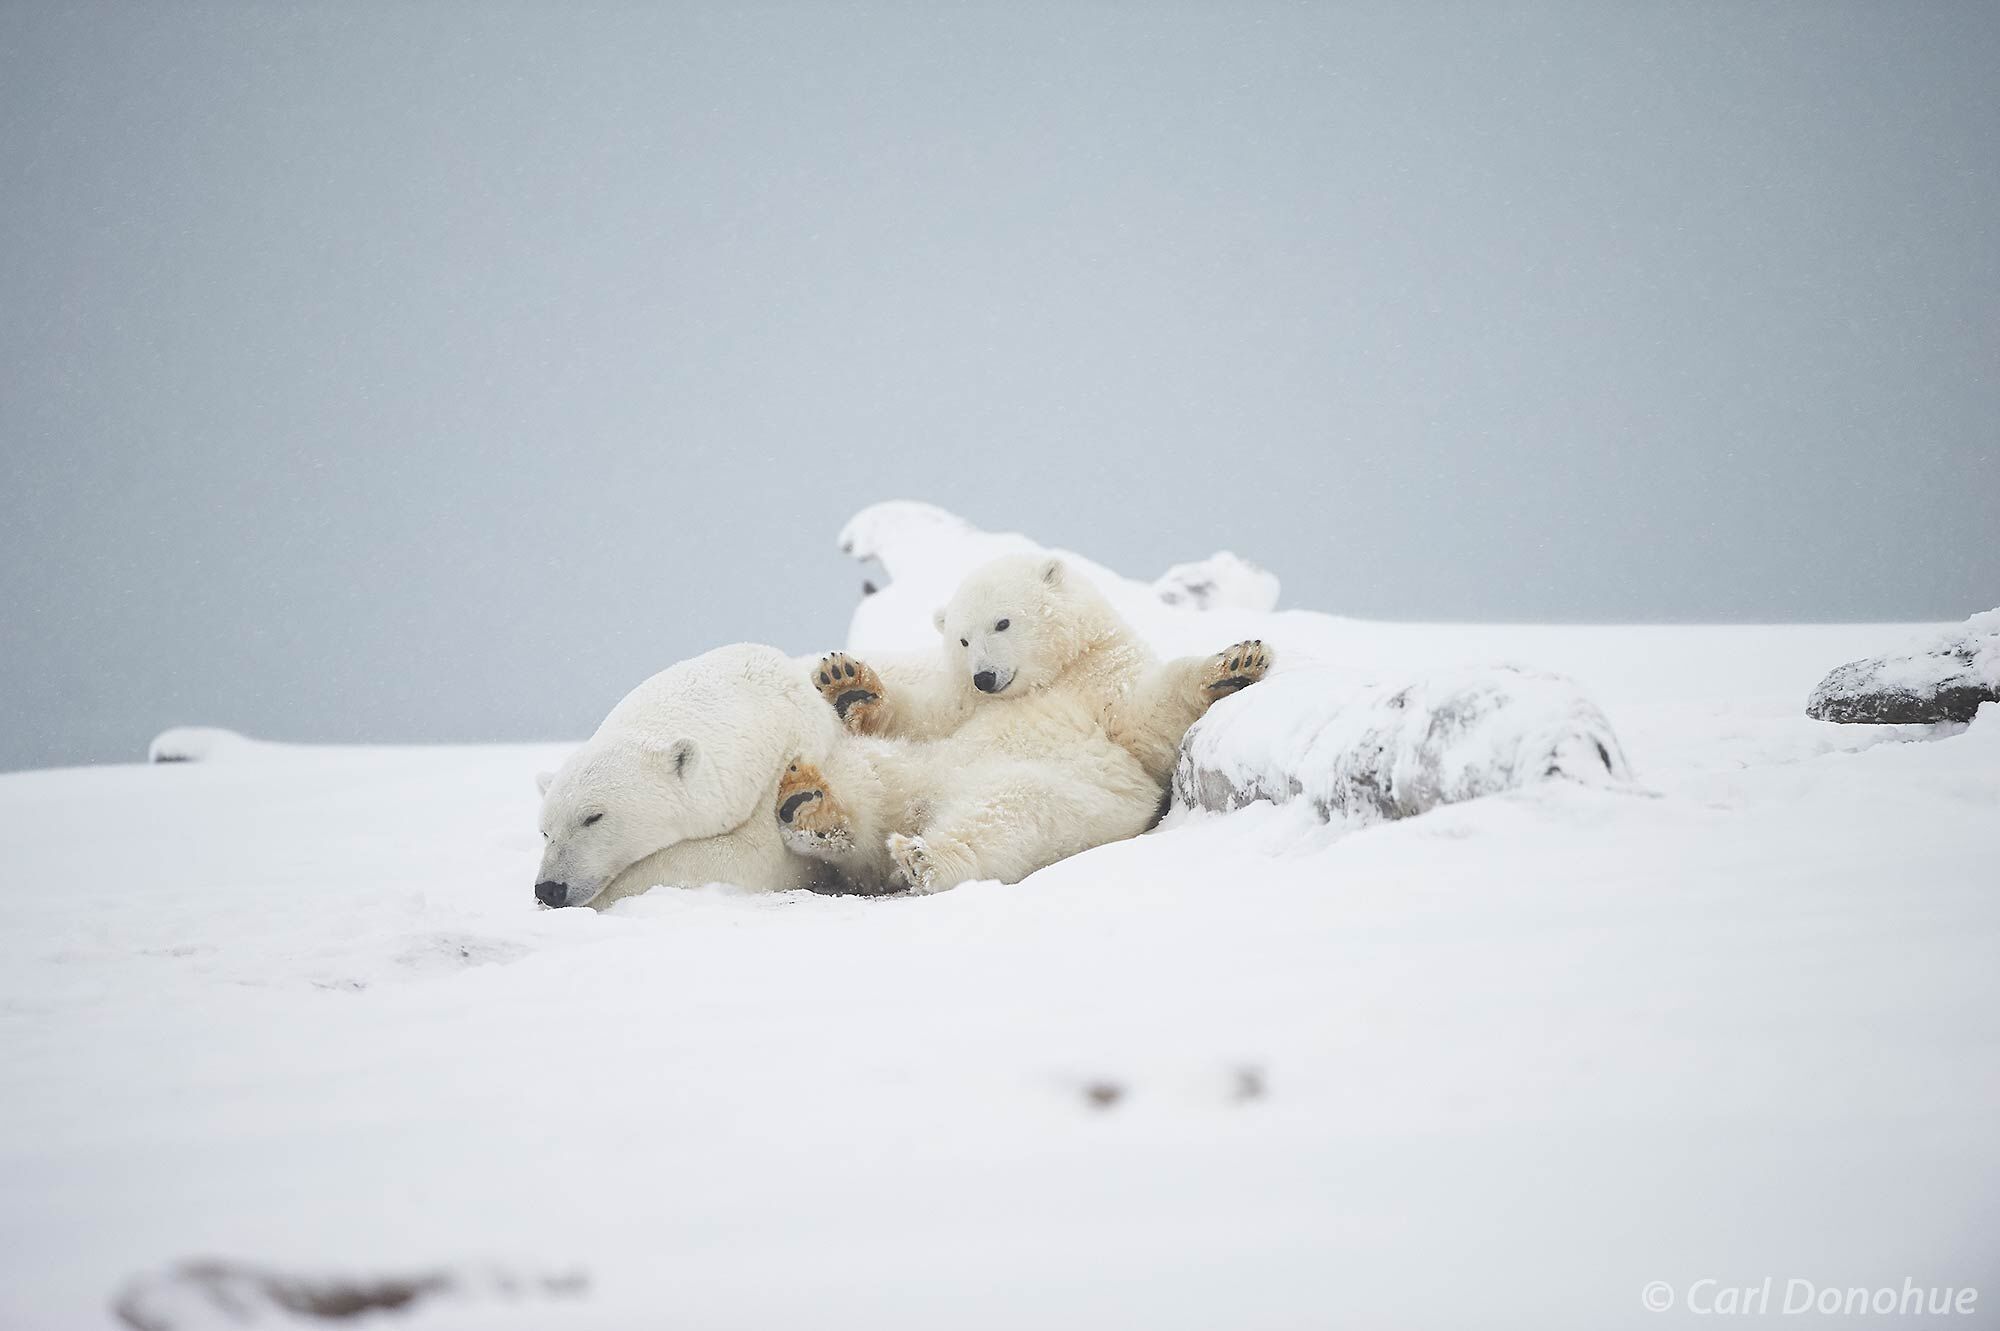 A sow and cub, or mother and hr young baby polar bear, lie in the snow, the mother catching some rest and the cub happily playing...